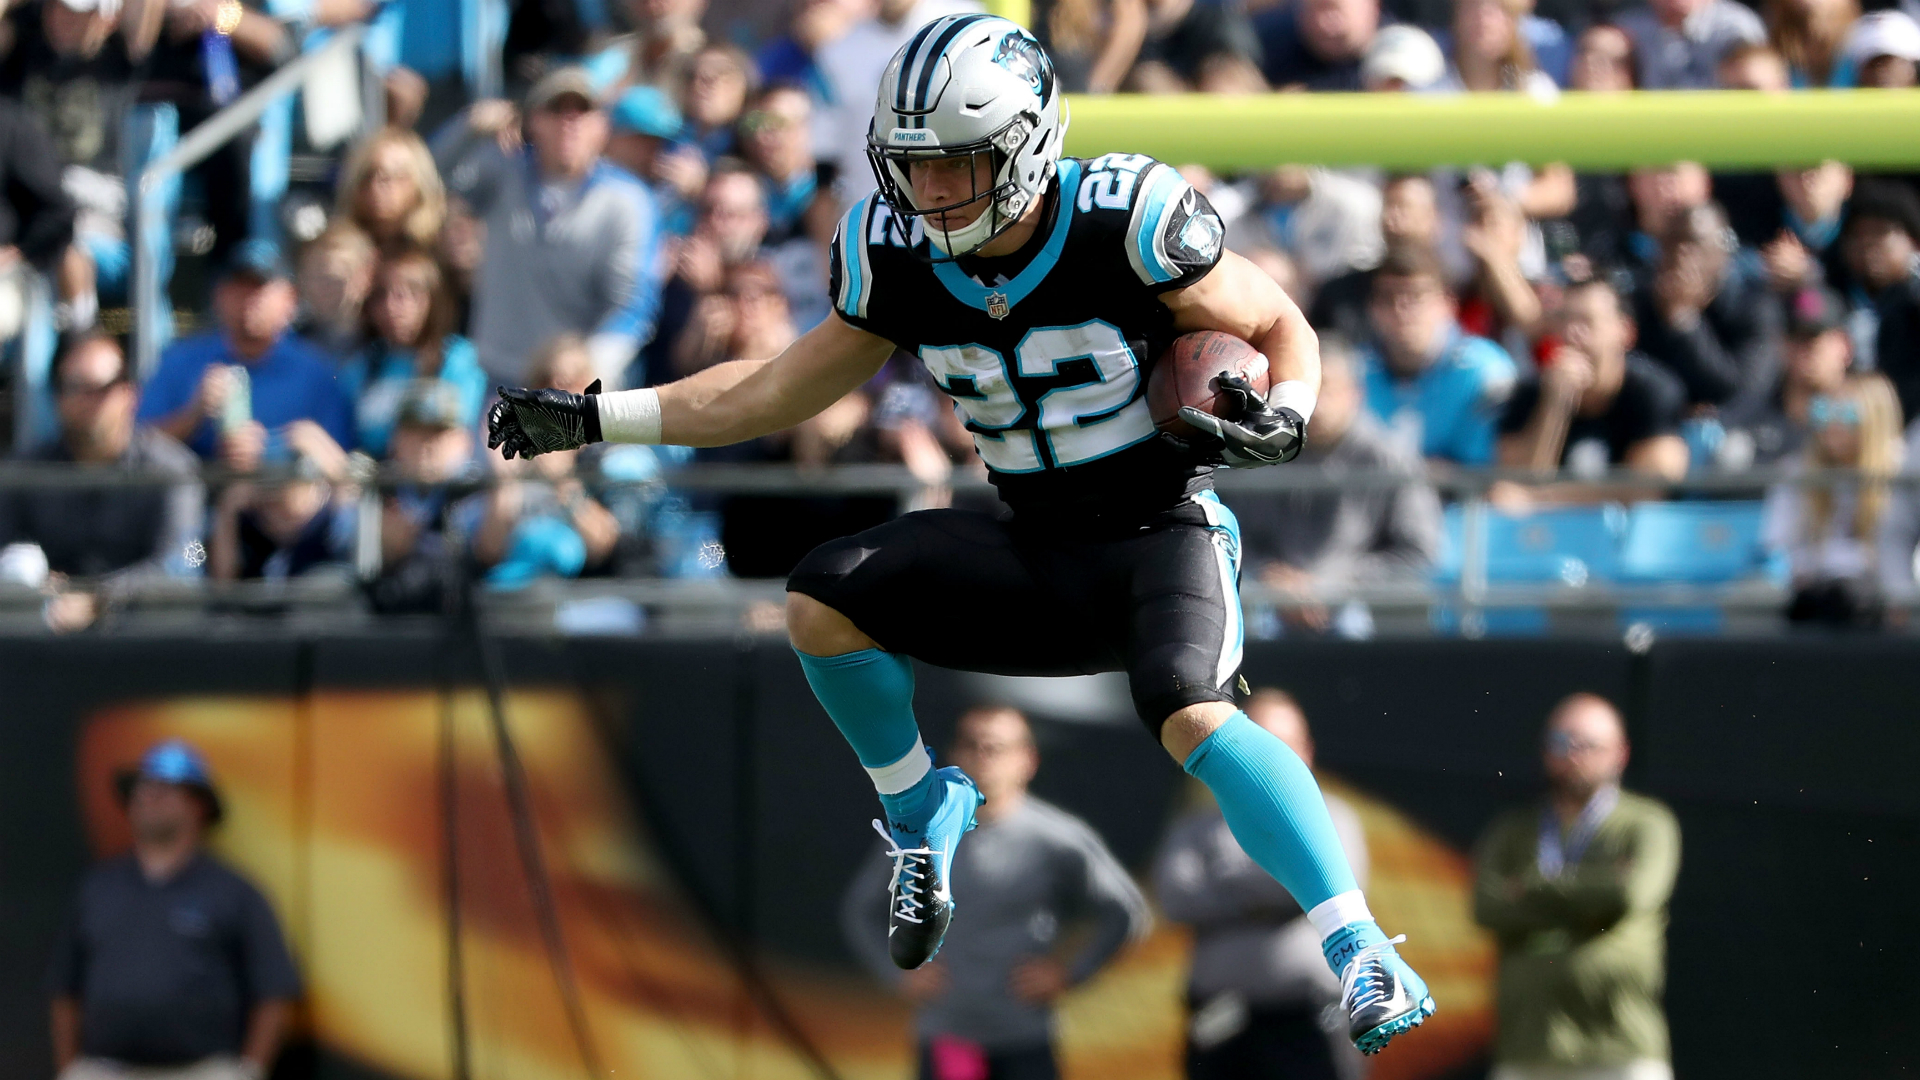 Like a cat': Christian McCaffrey continues to wow Panthers